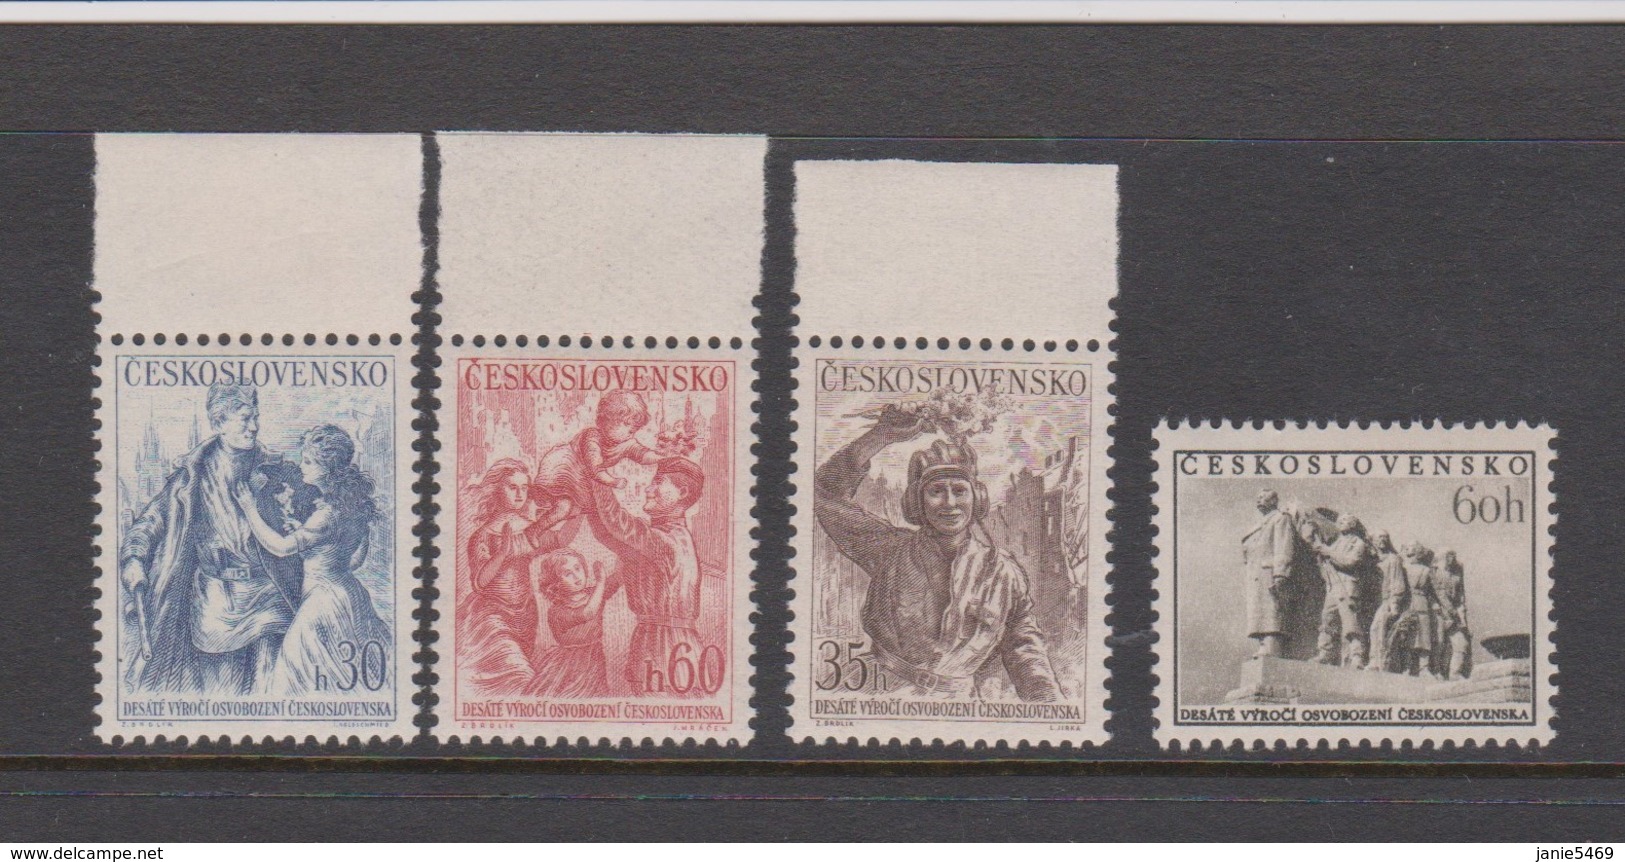 Czechoslovakia Scott 688-691 1955 10th Anniversary Of Liberation,mint Never Hinged - Unused Stamps